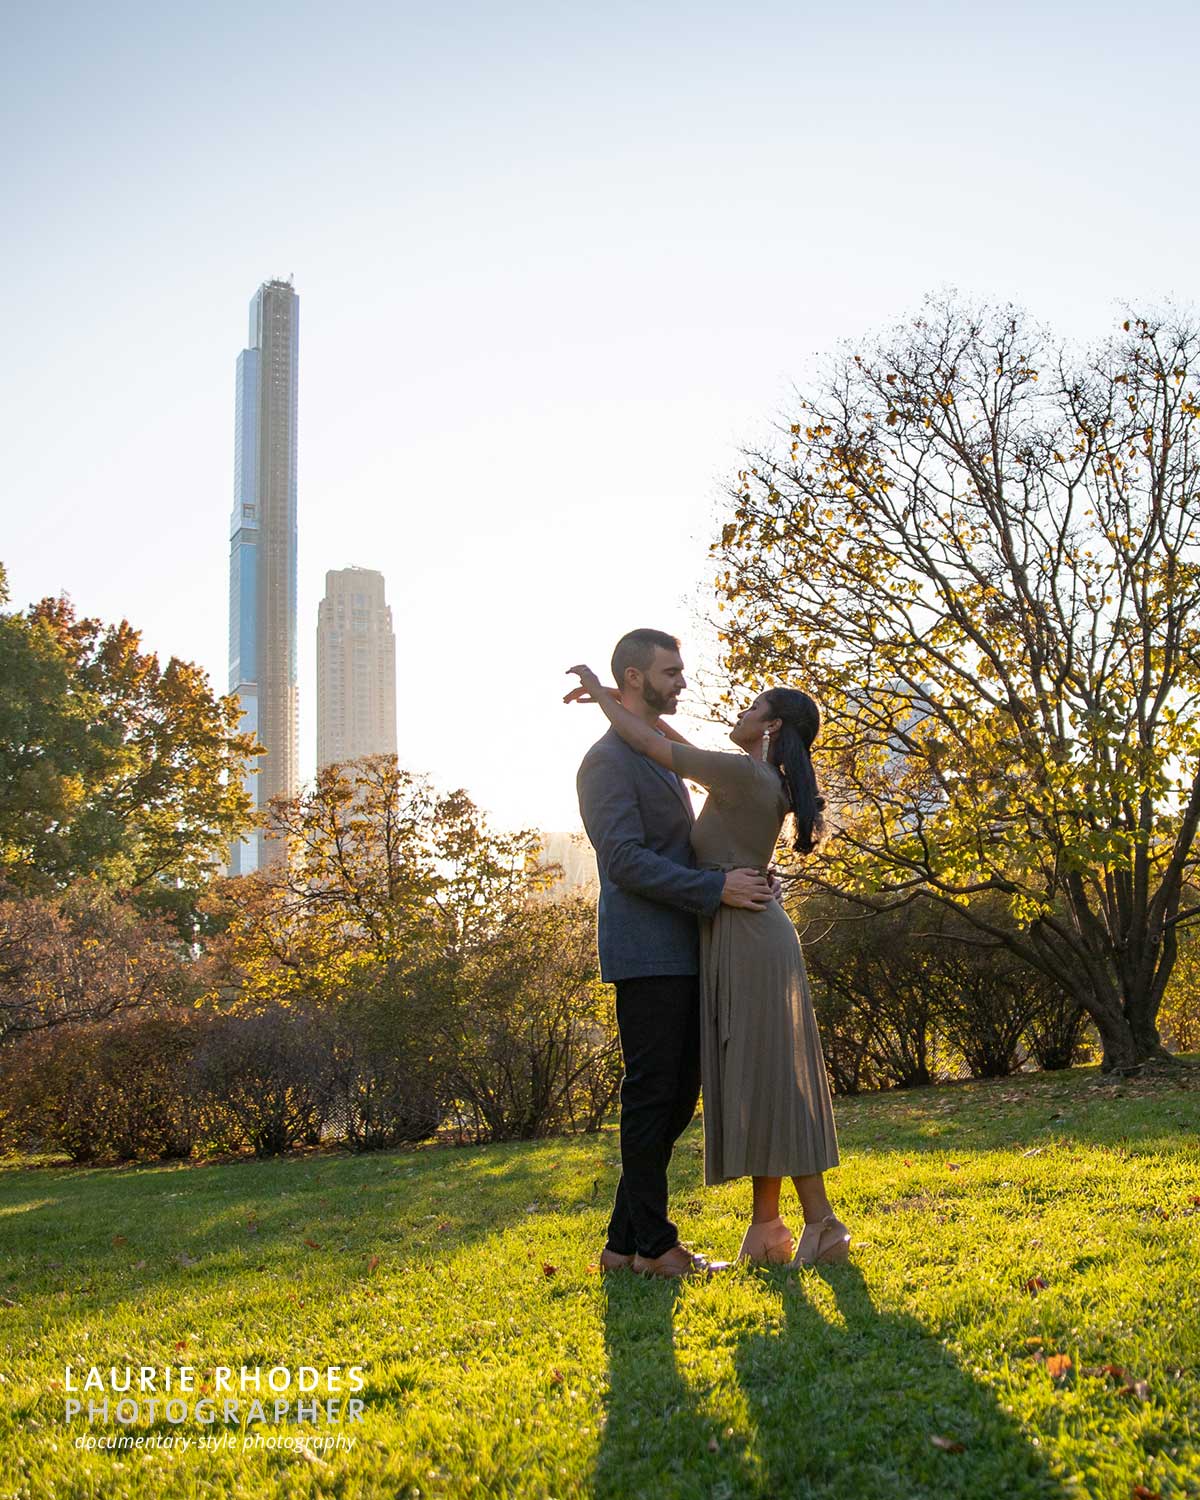 6 - Engagement photography from 2020 by Laurie Rhodes